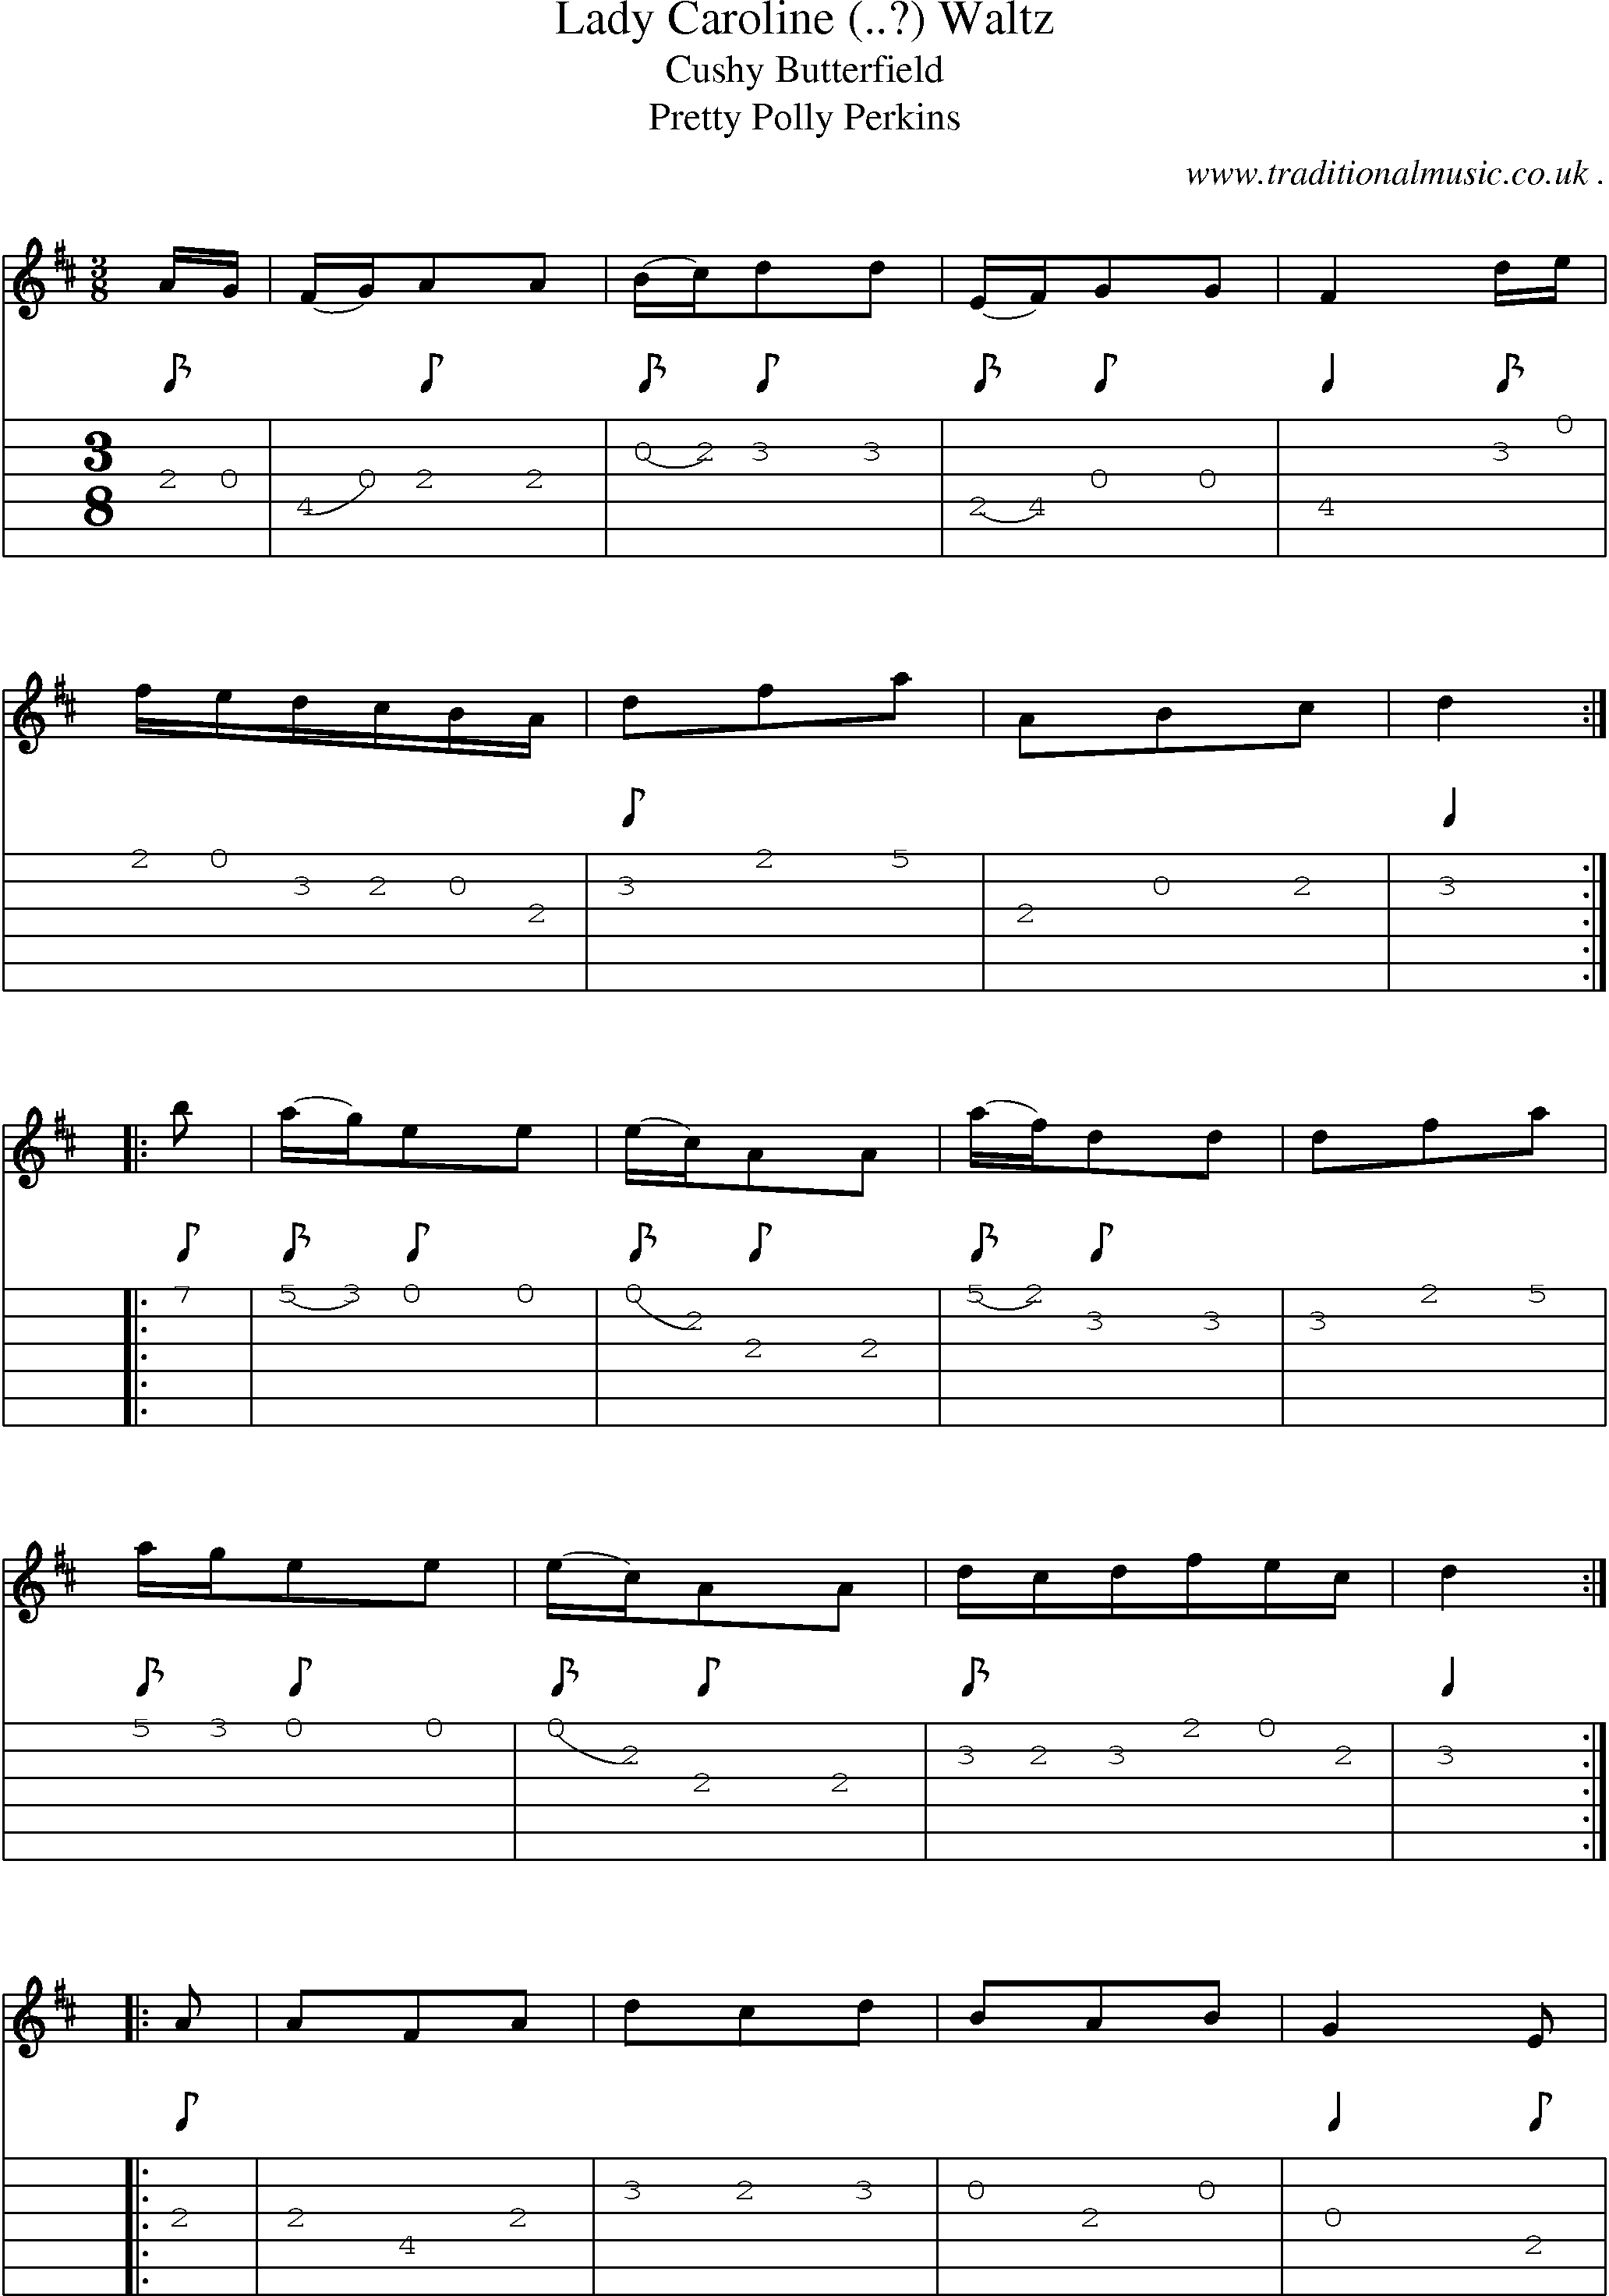 Sheet-Music and Guitar Tabs for Lady Caroline  Waltz